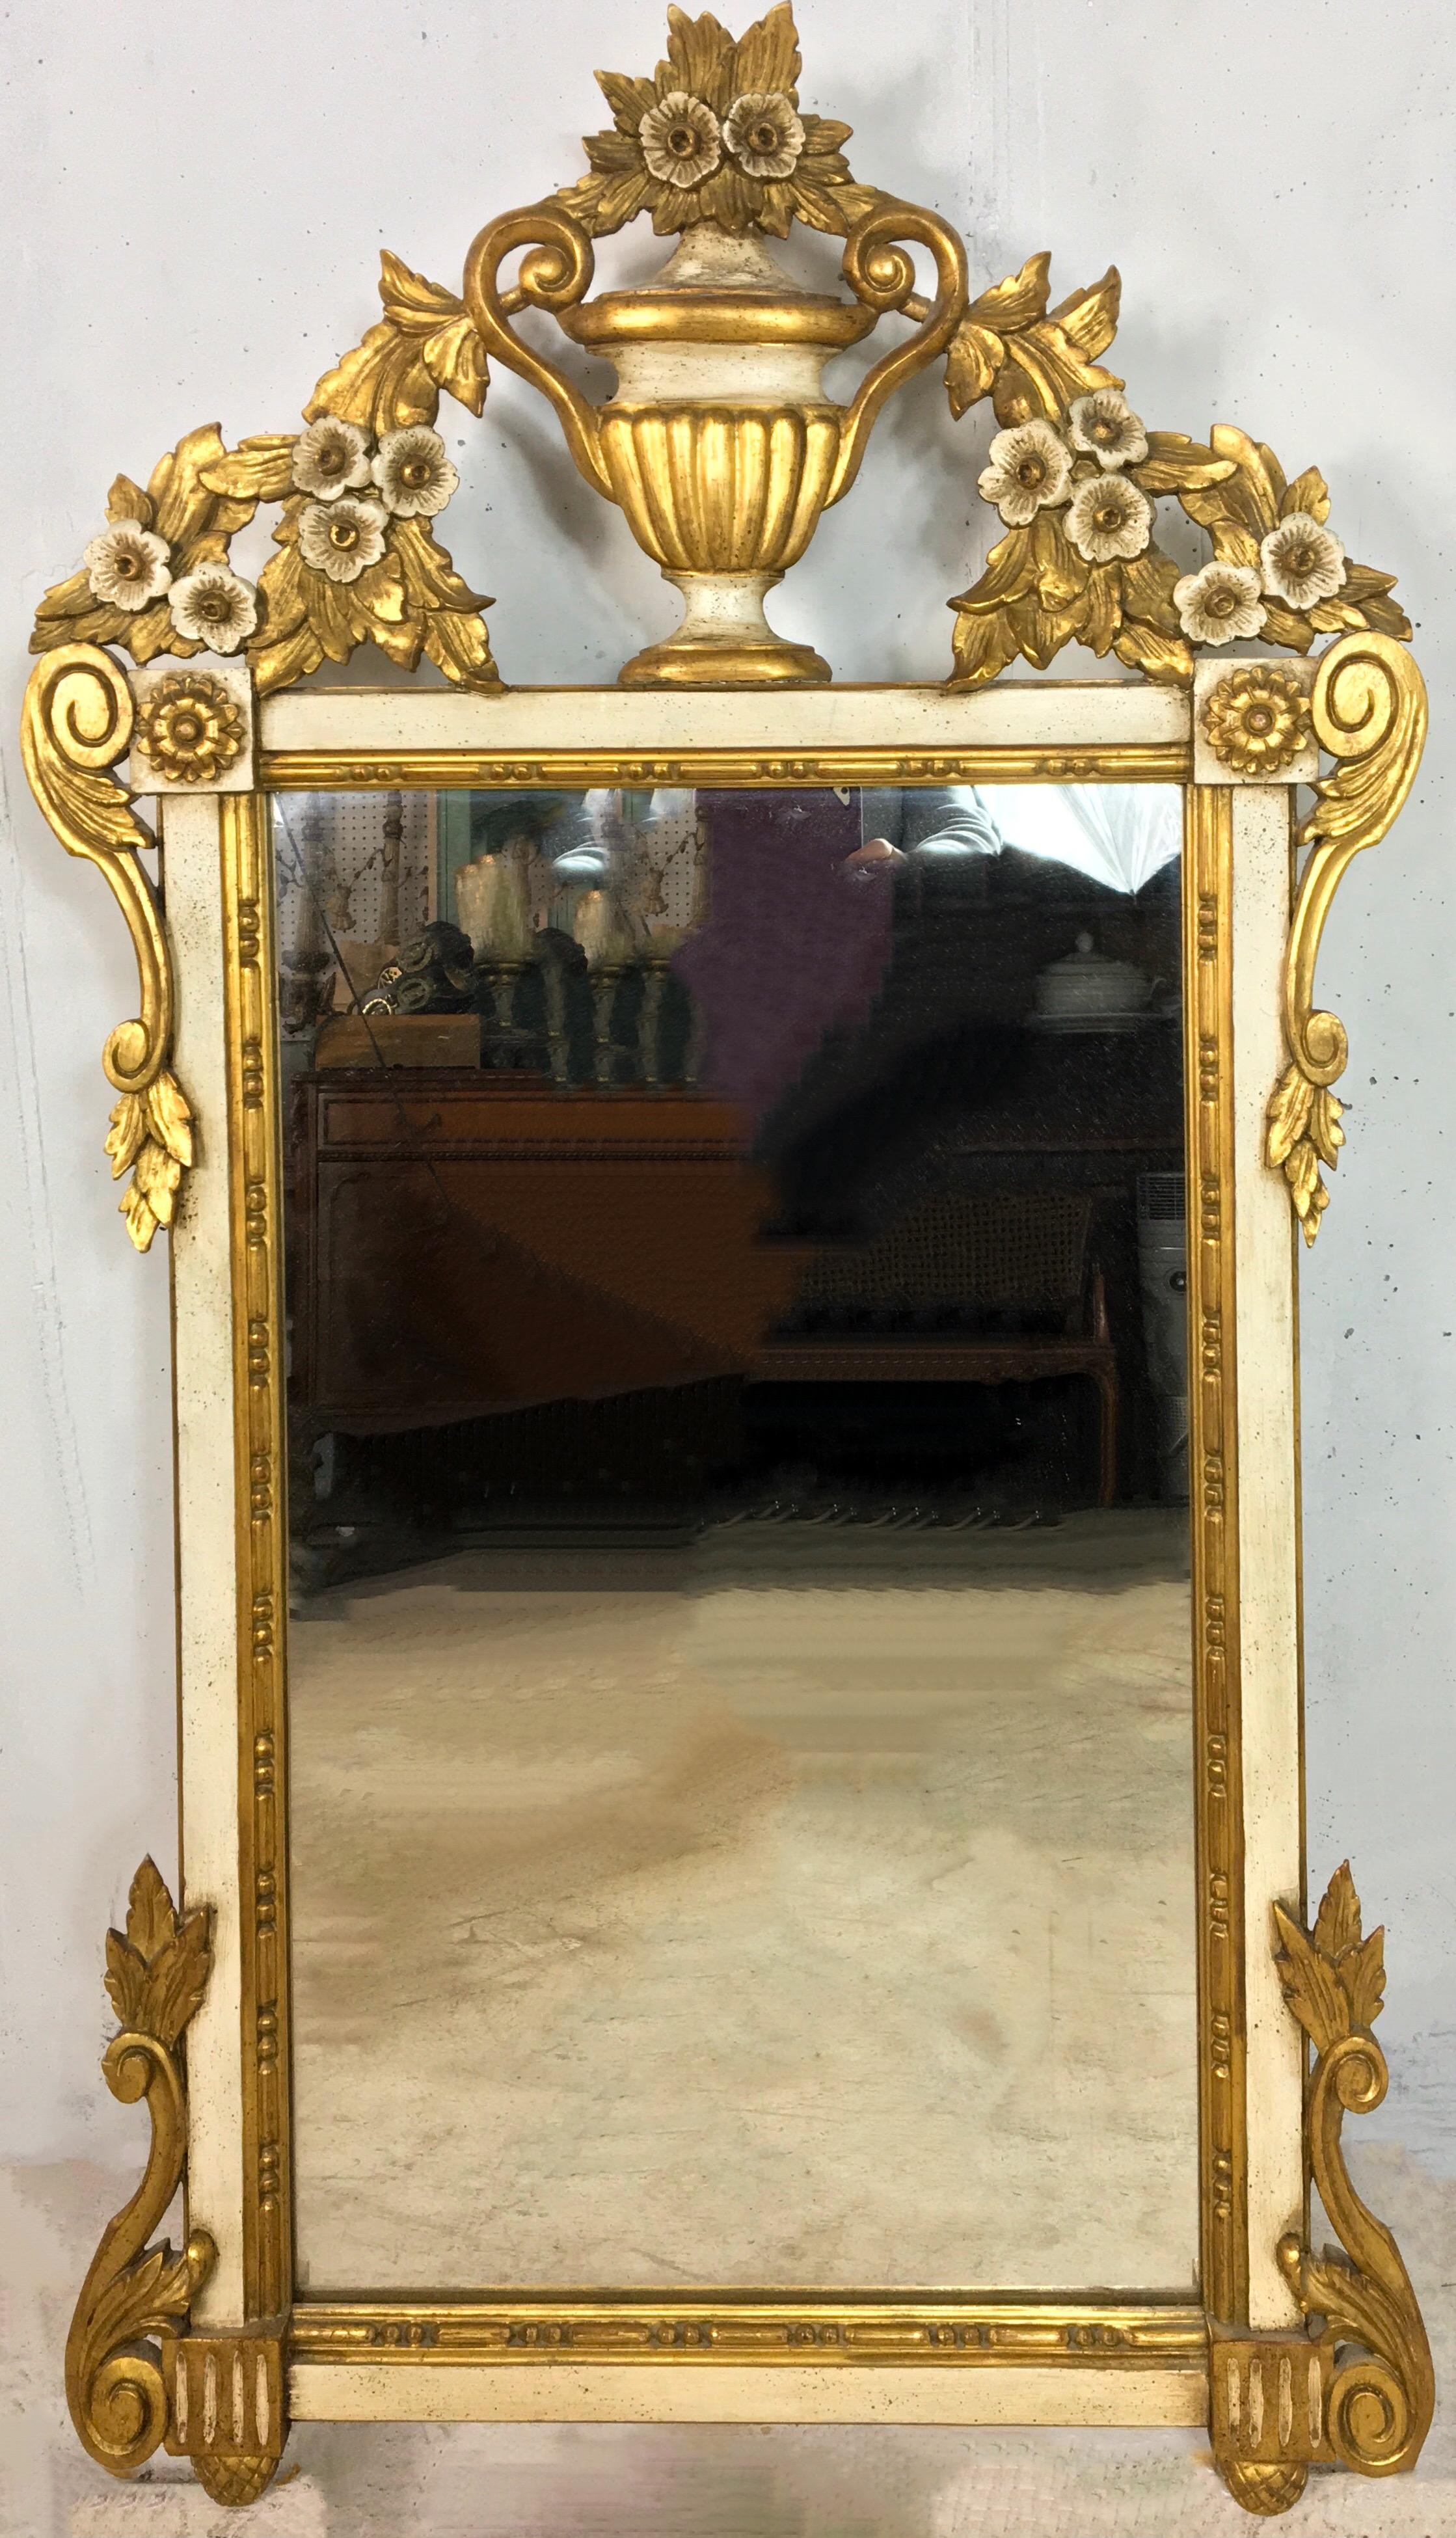 20th Century 1960s Italian Neo-Classical Style Carved Giltwood Floral and Urn Motif Mirror For Sale